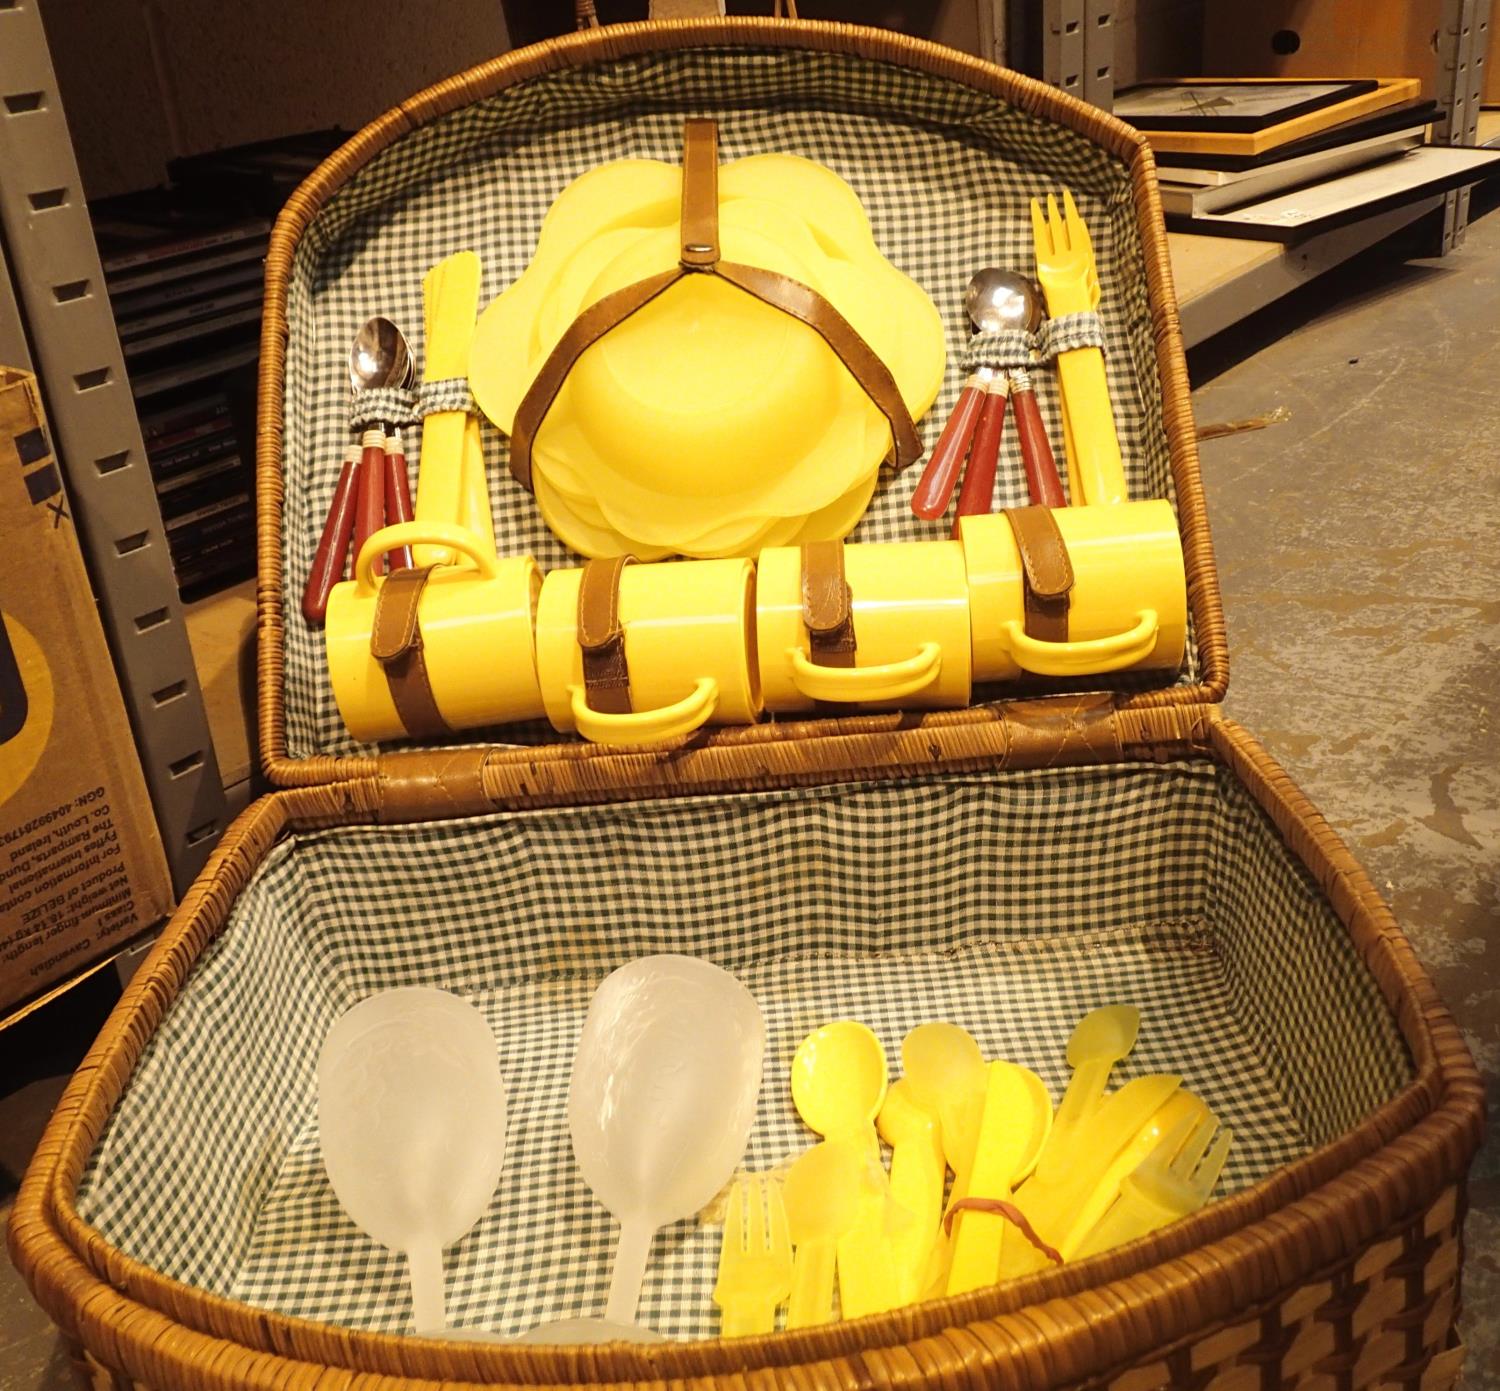 Four person wicker picnic baskets with unused contents. Not available for in-house P&P, contact Paul